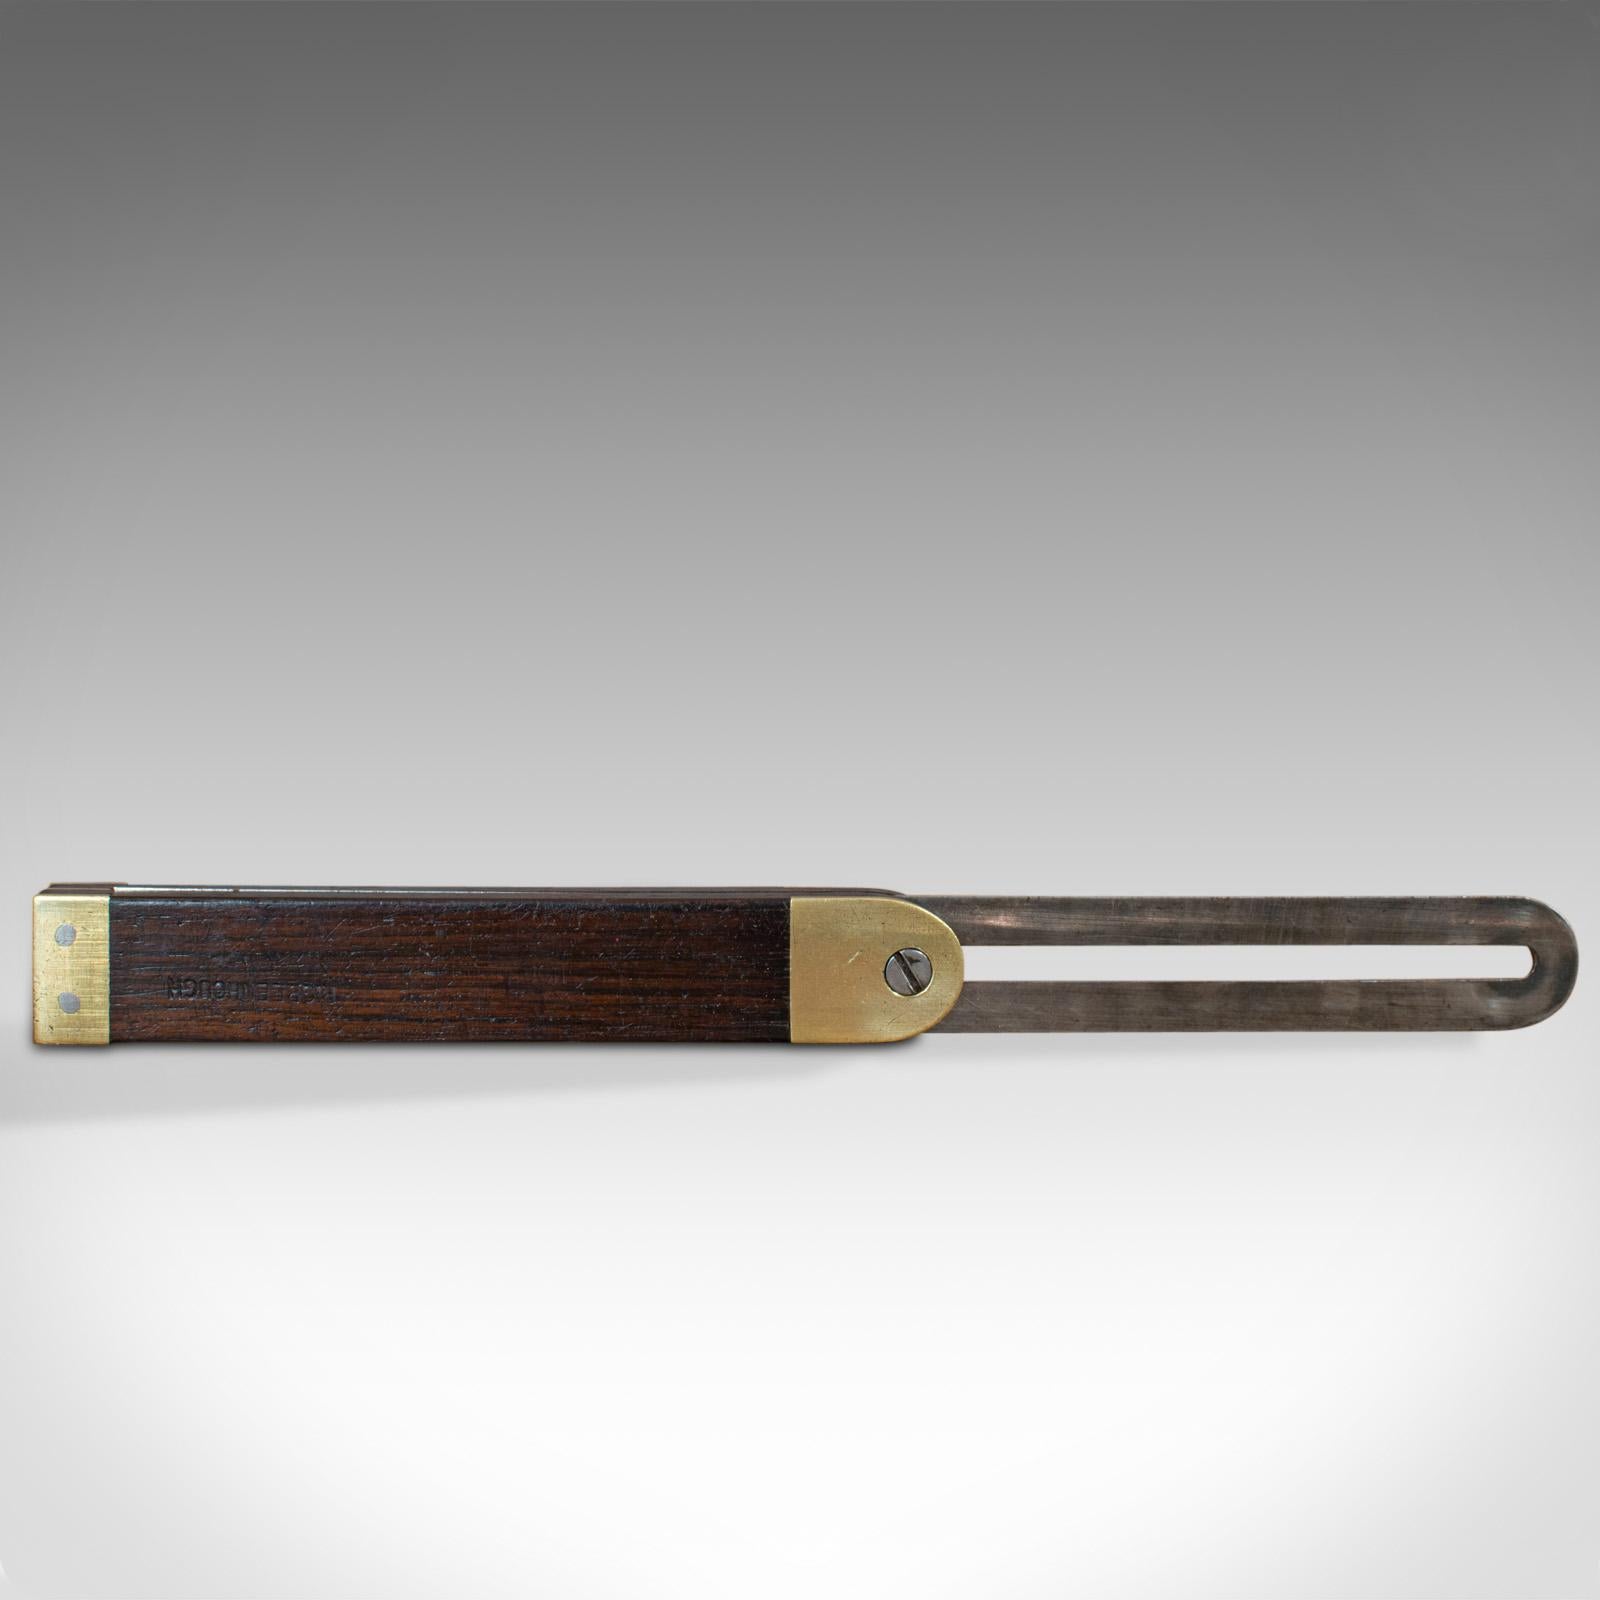 This is a vintage sliding bevel. An English, rosewood and brass craftsman's tool, dating to the mid-20th century, circa 1950.

Attractive vintage tool
Displays a desirable aged patina
Rosewood handle with brass caps offering pleasing